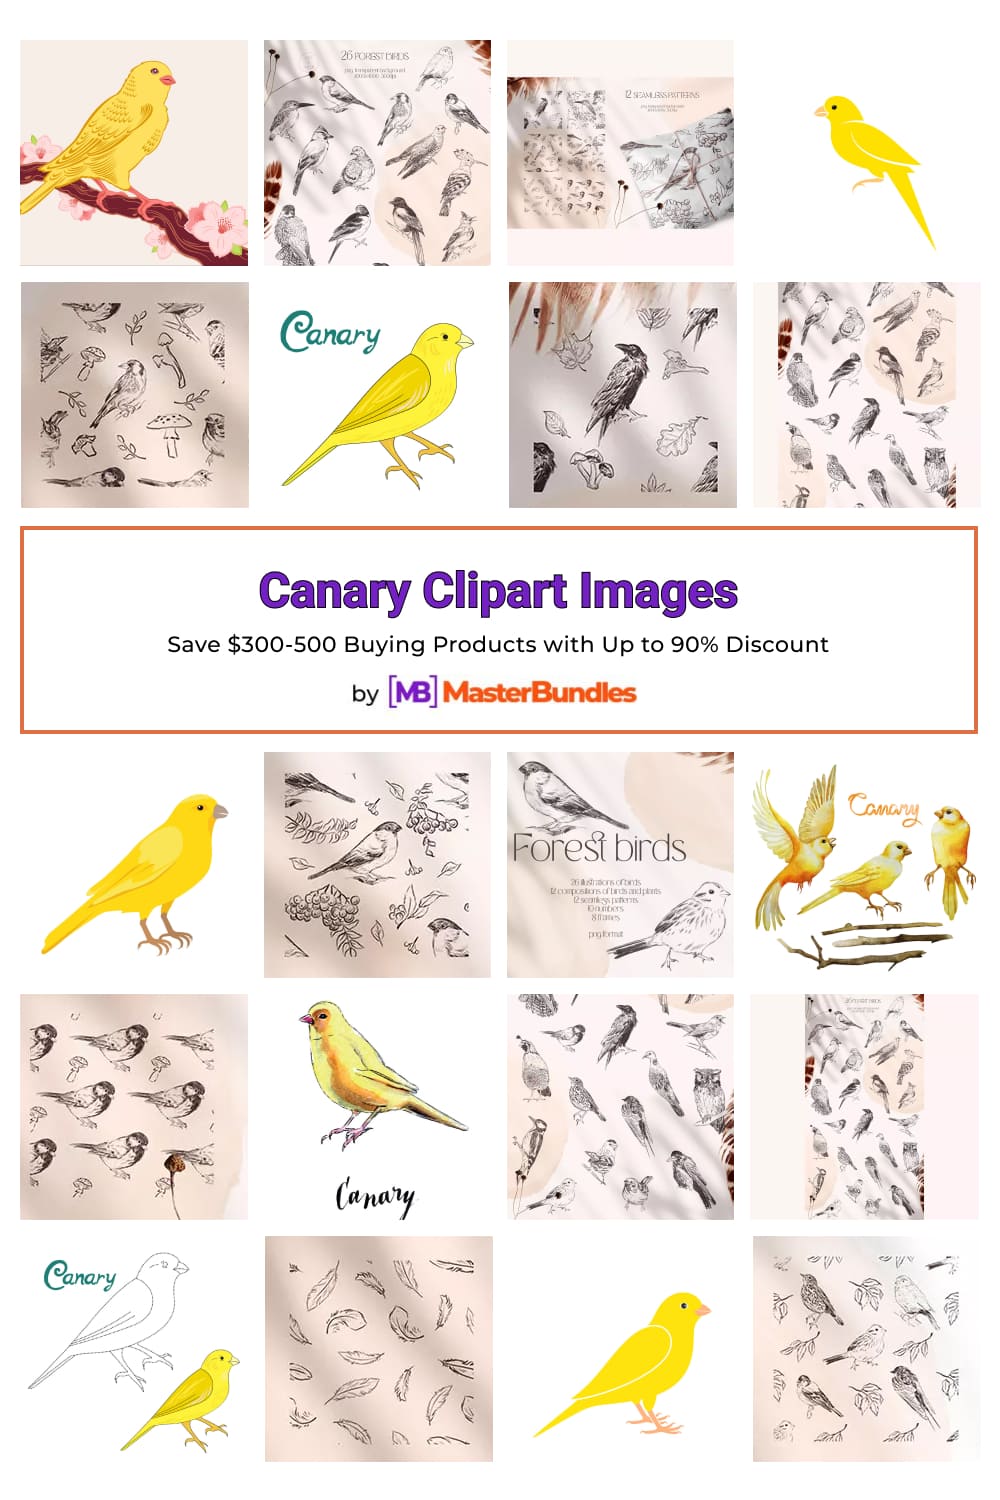 Canary Clipart Images Pinterest.